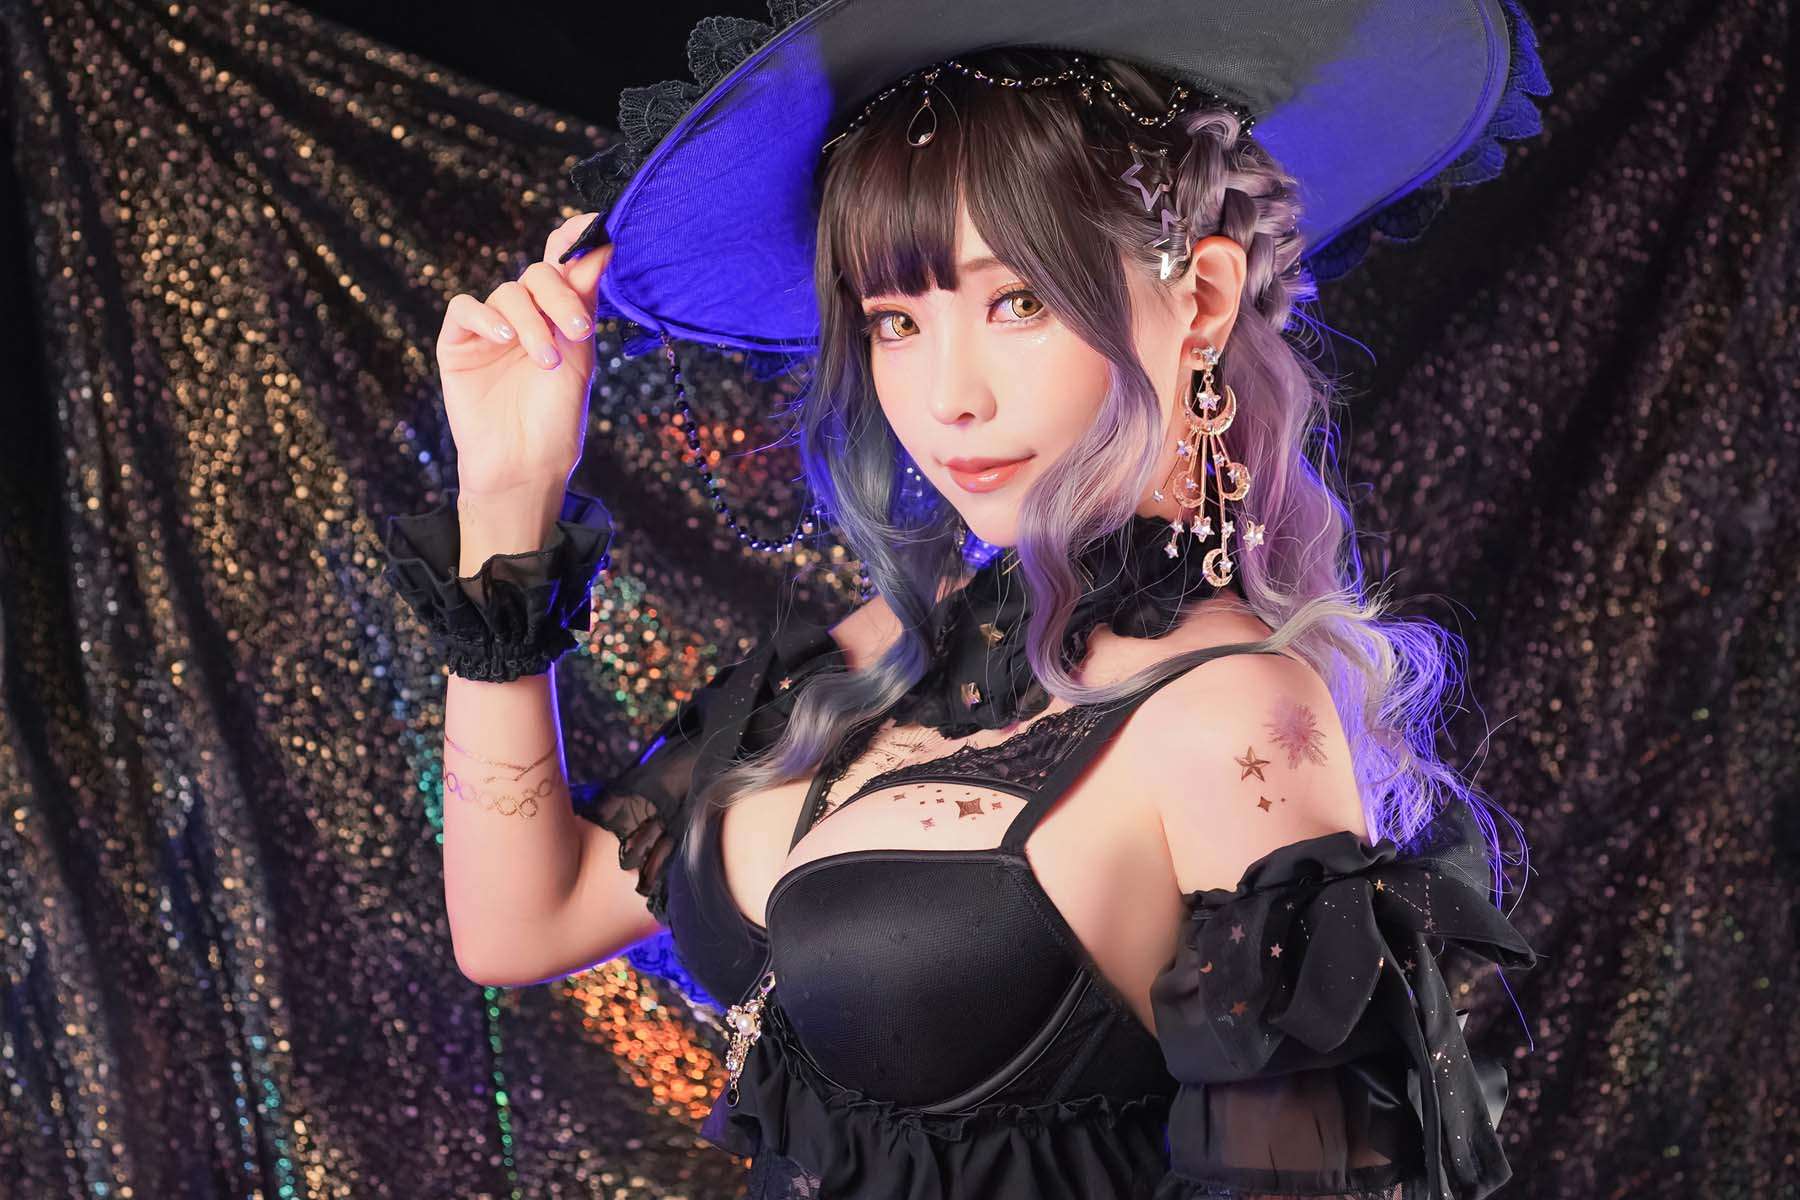 [Coser] ElyEE子 - Celestial, astrology witch